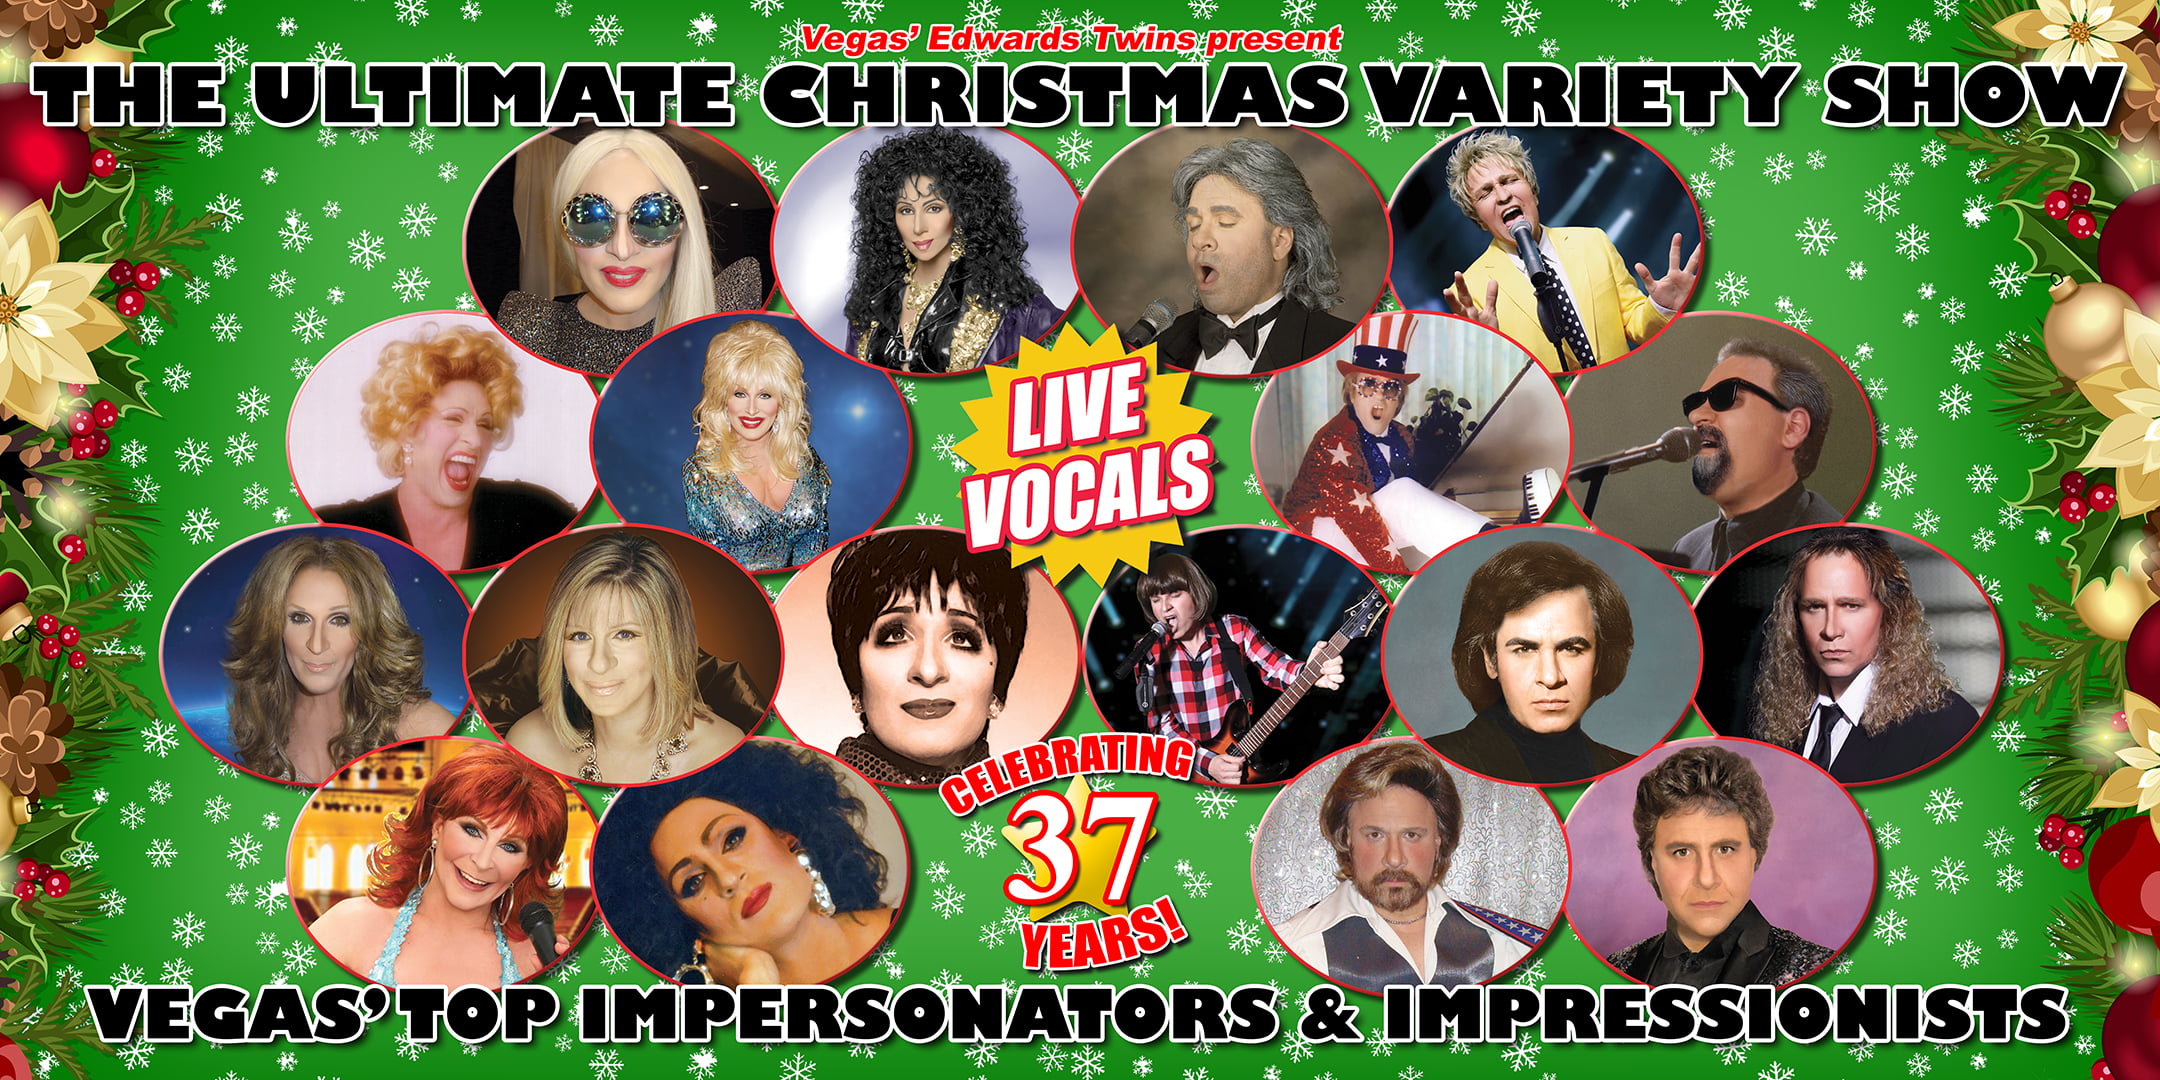 Flier for The Ultimate Christmas Variety Show